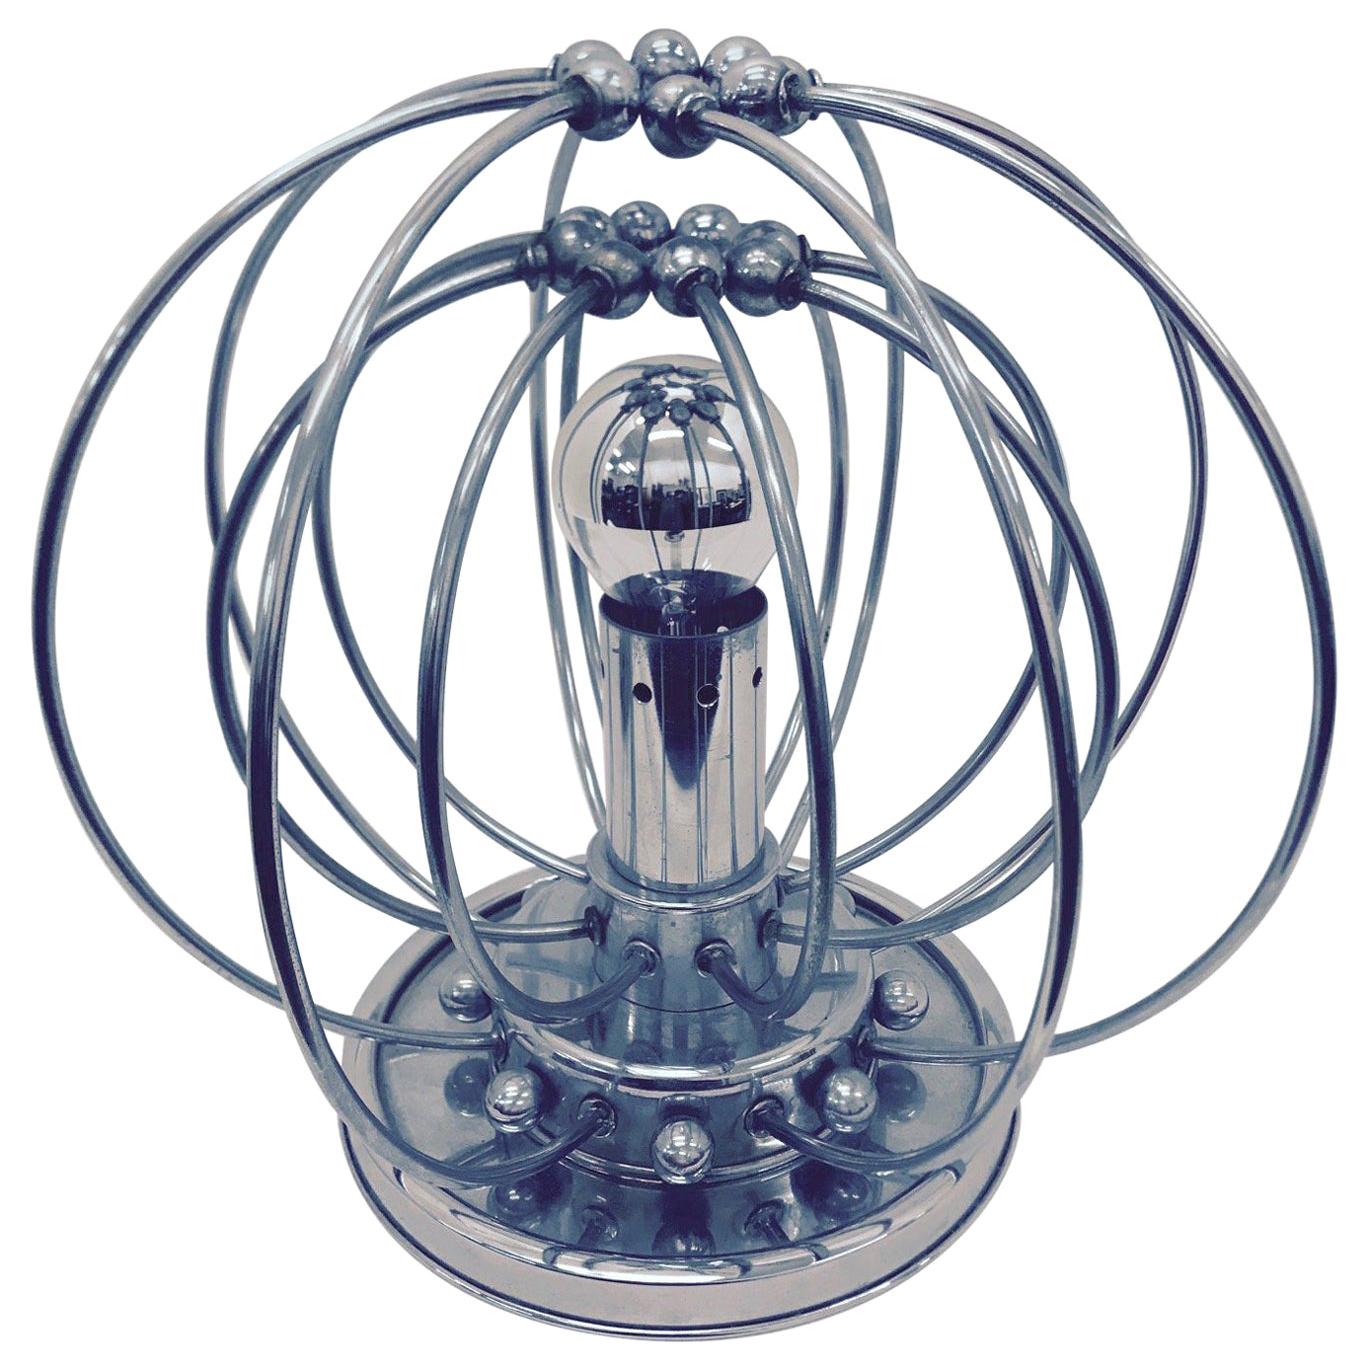 1970s Rare Space Age Chromed Italian Table Lamp in the style of Pistillo Lamp For Sale